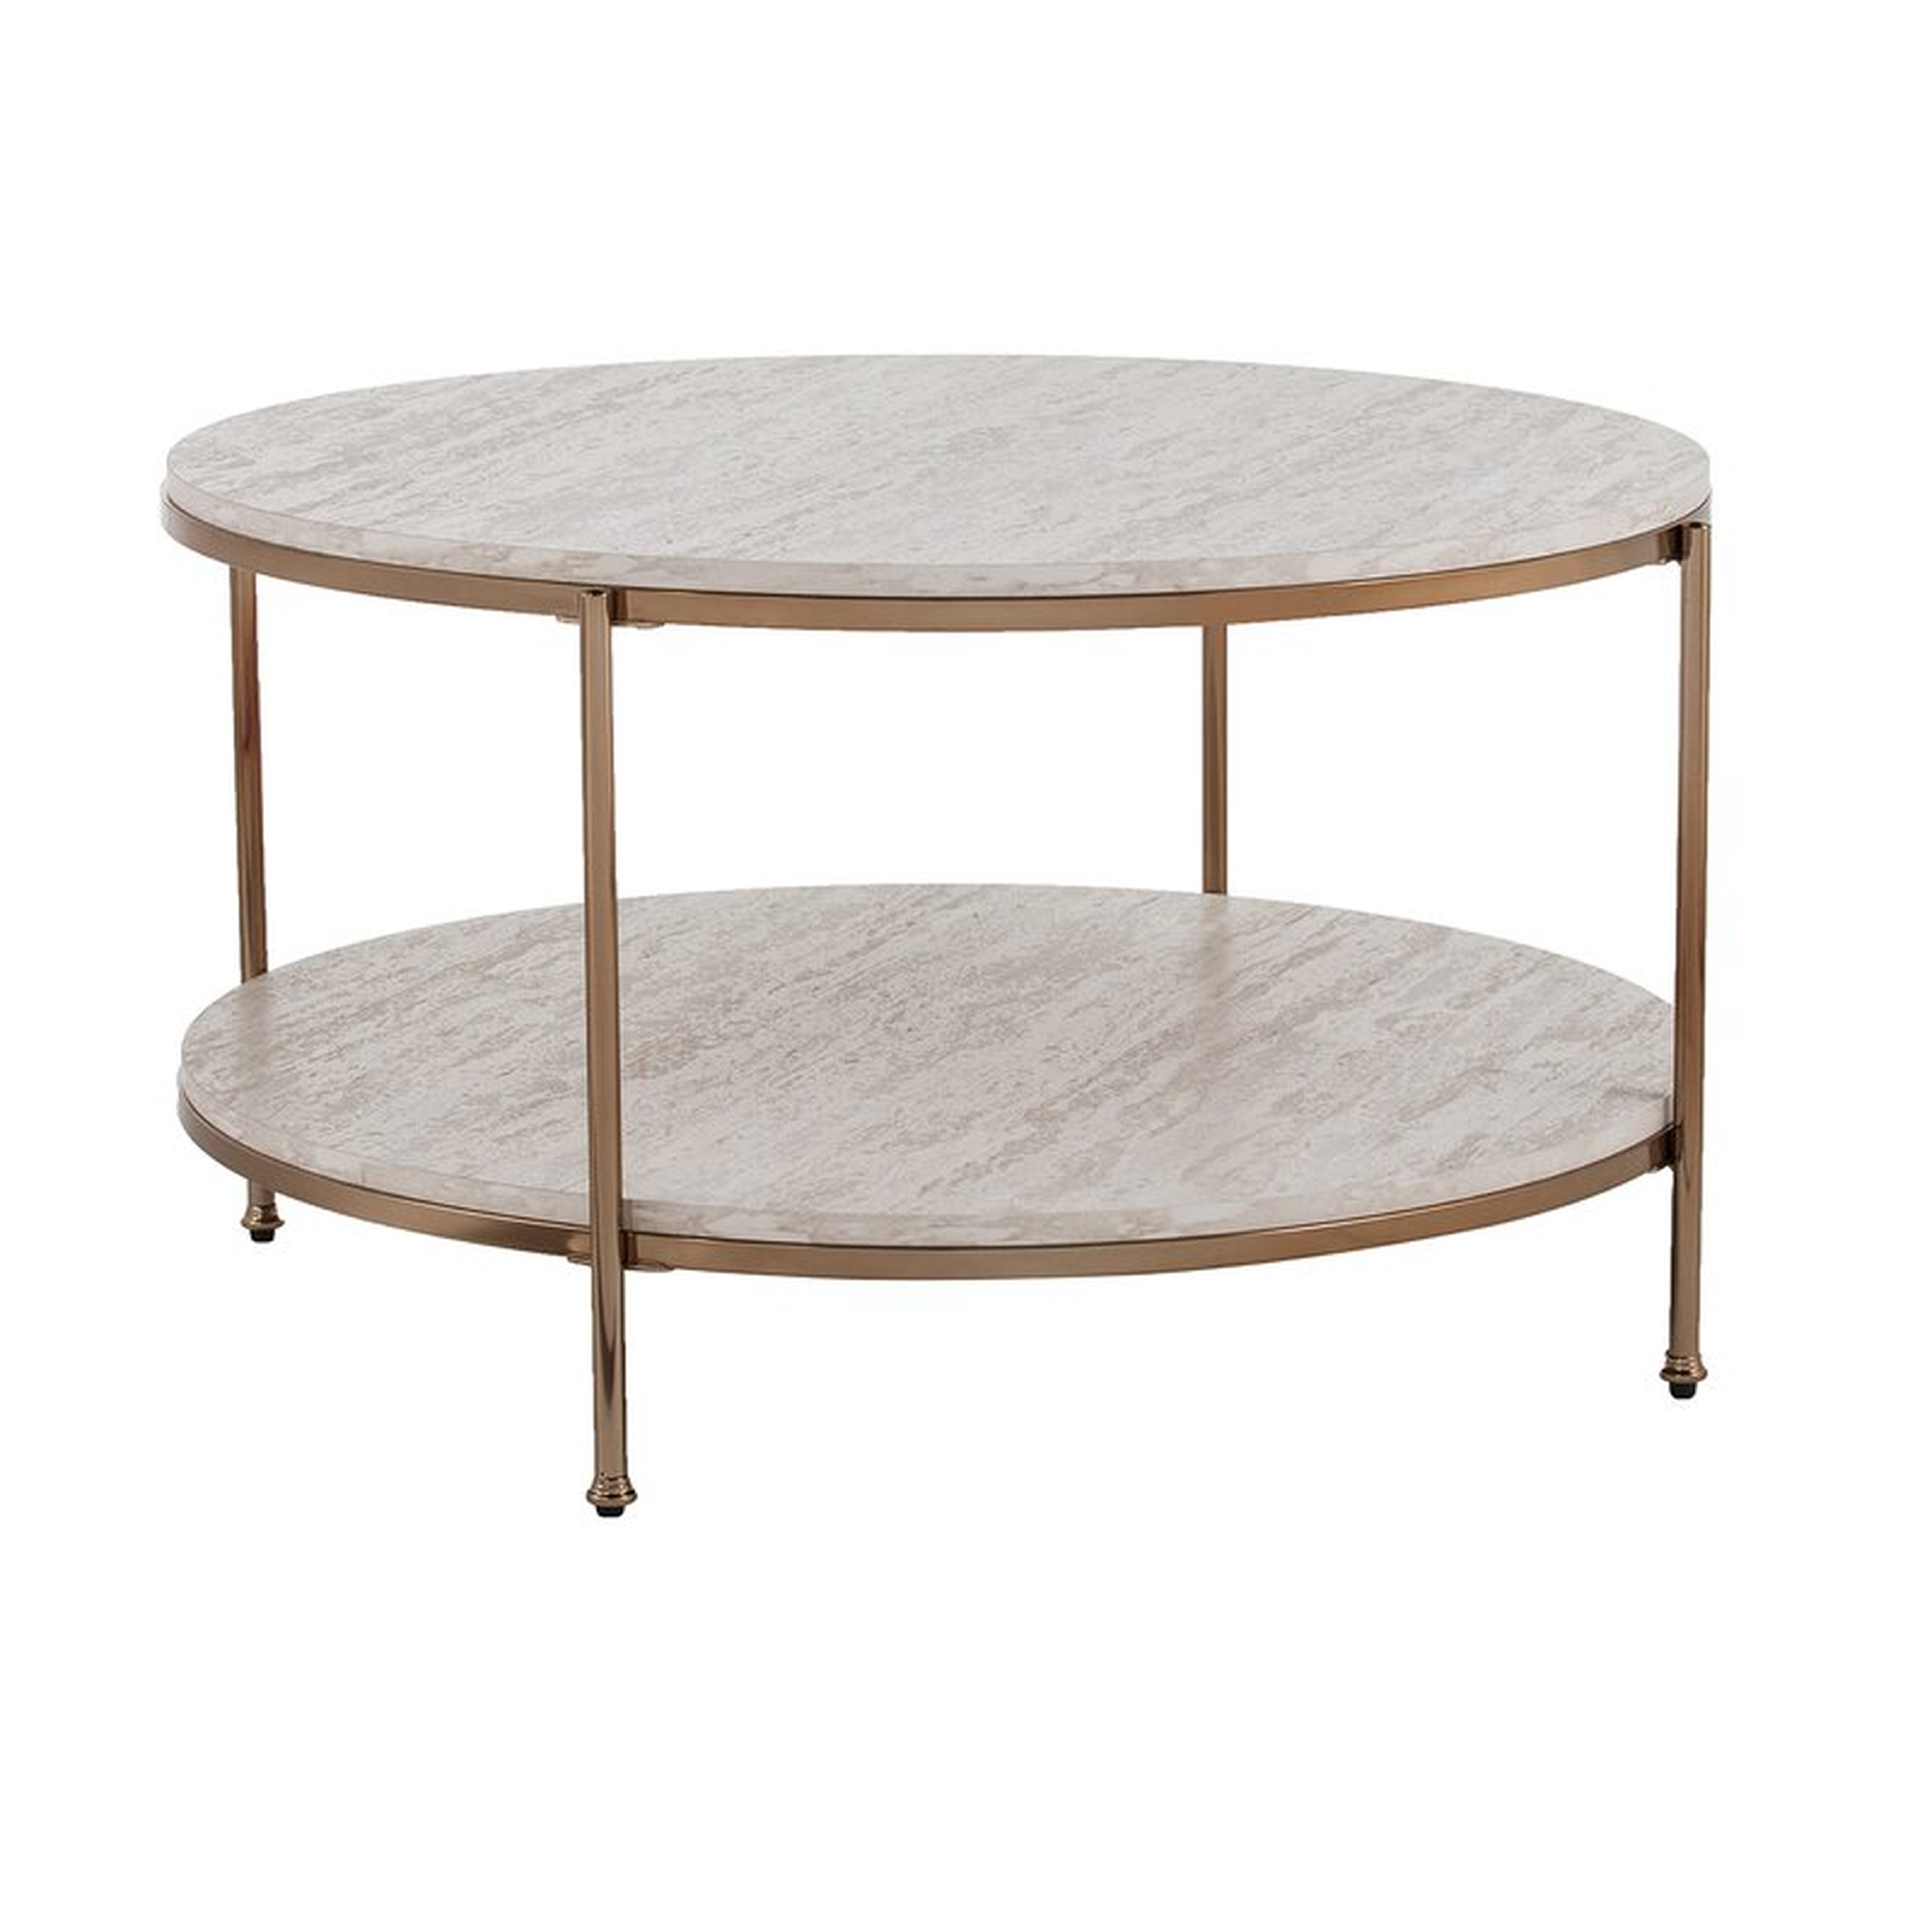 Stamper Coffee Table with Storage, Champagne - Wayfair